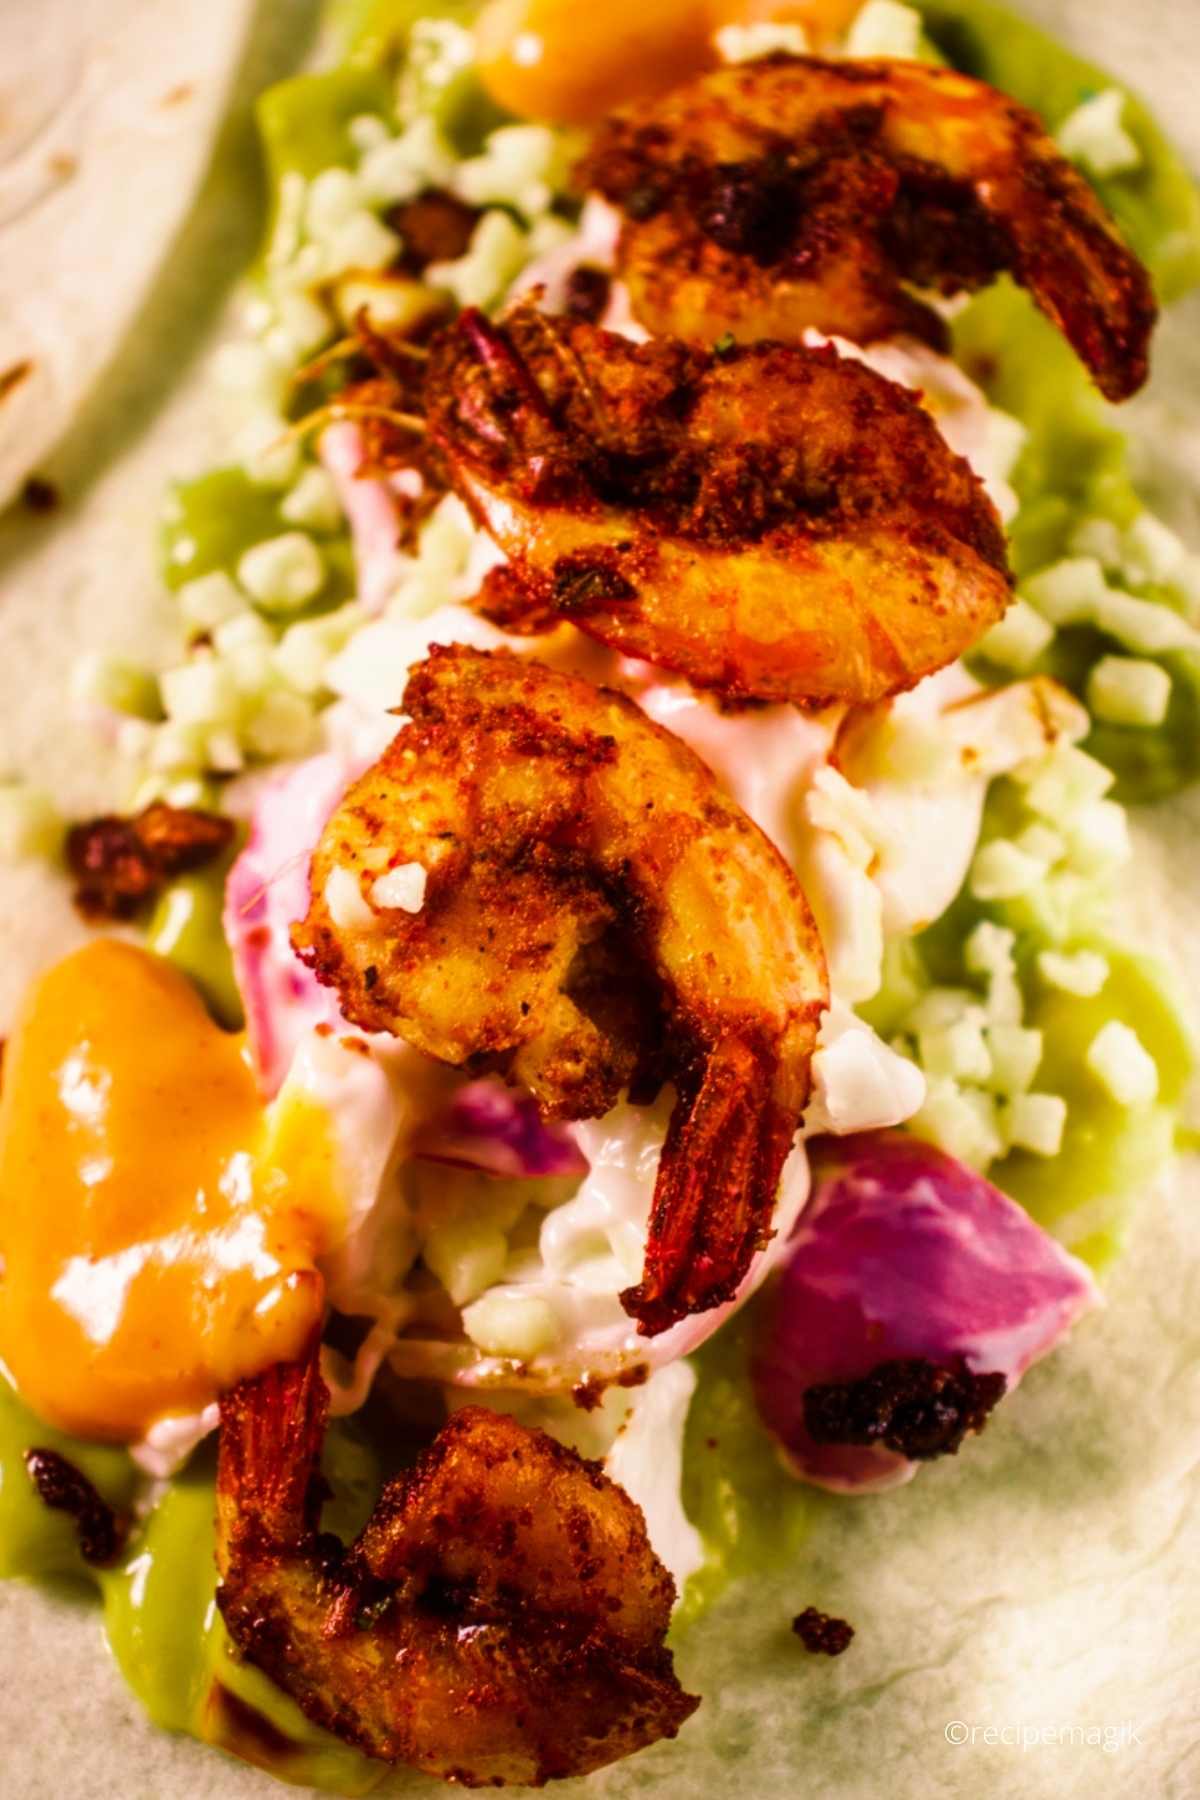 blackened shrimps arranged in a taco with guacamole